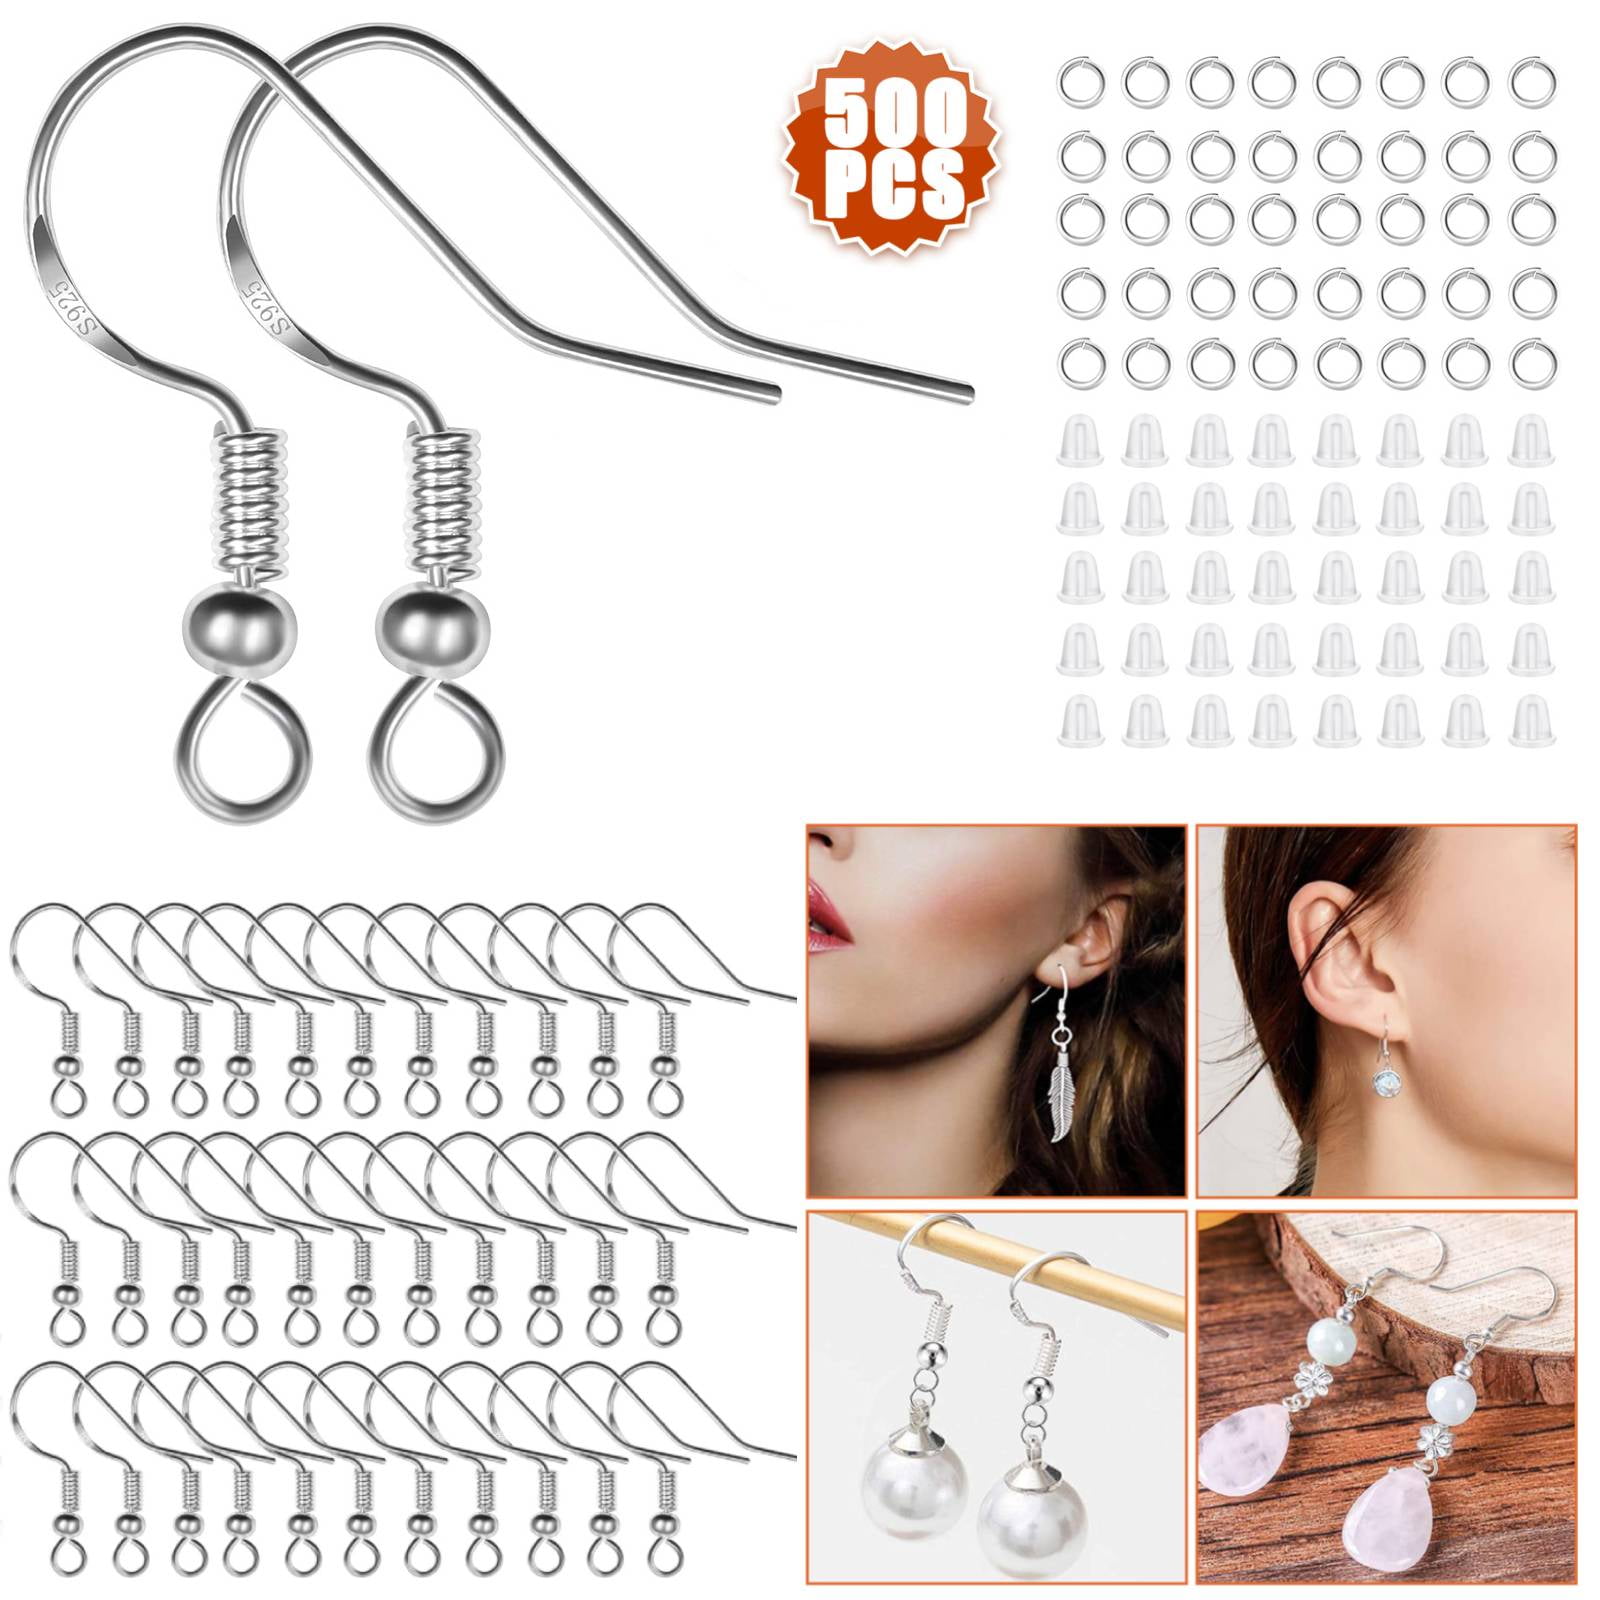 CELECTIGO 925 Sterling Silver Earring Hooks, 500-Pcs Ear Wire Fish Hooks  Hypoallergenic Earring Making Kit with Clear Silicone Earring Backs  Stoppers for All DIY Jewelry Making 